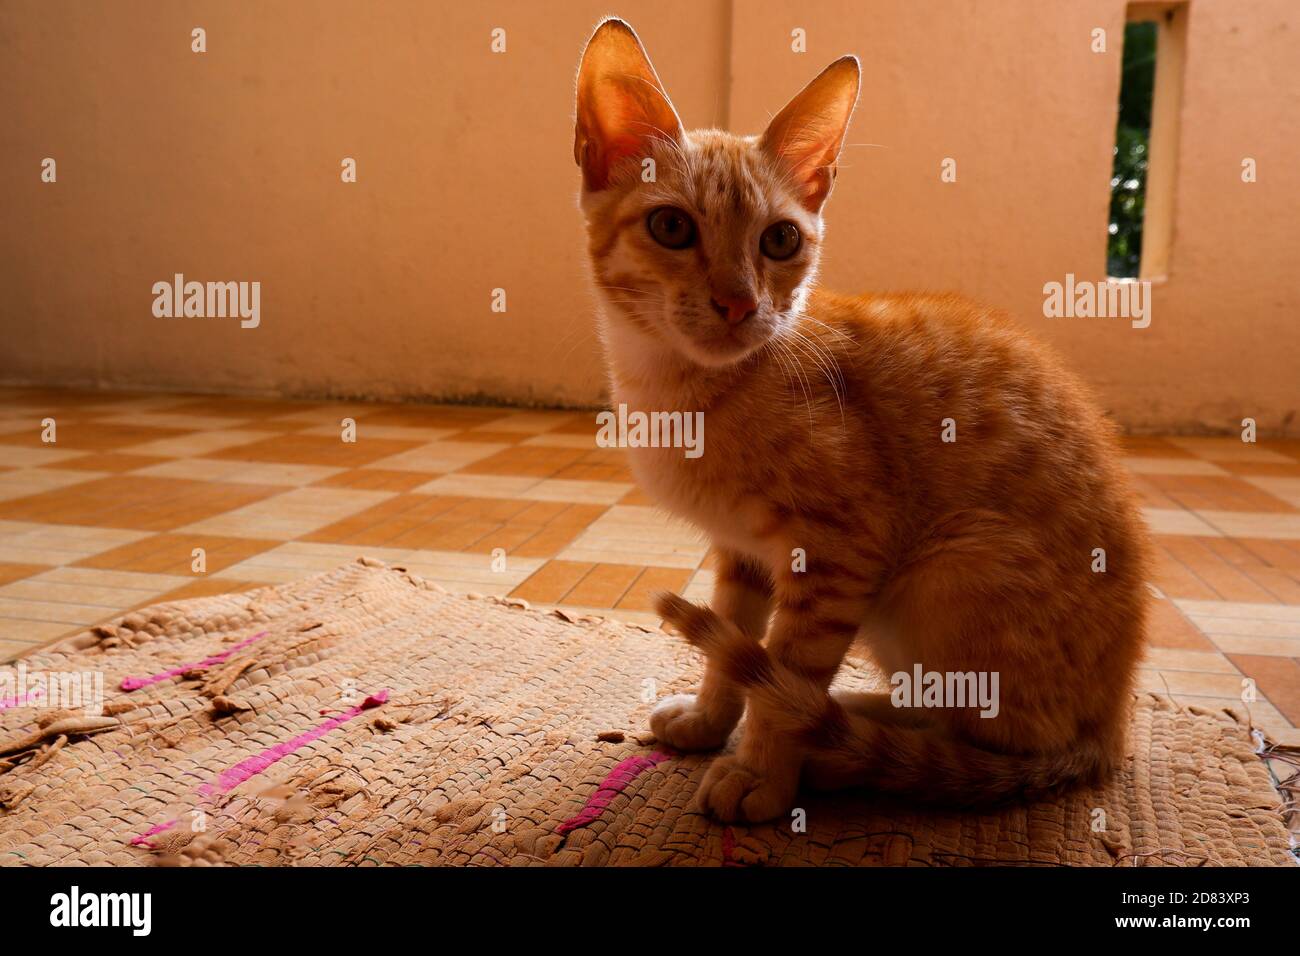 a close view of ginger striped kitten isolated in house Stock Photo